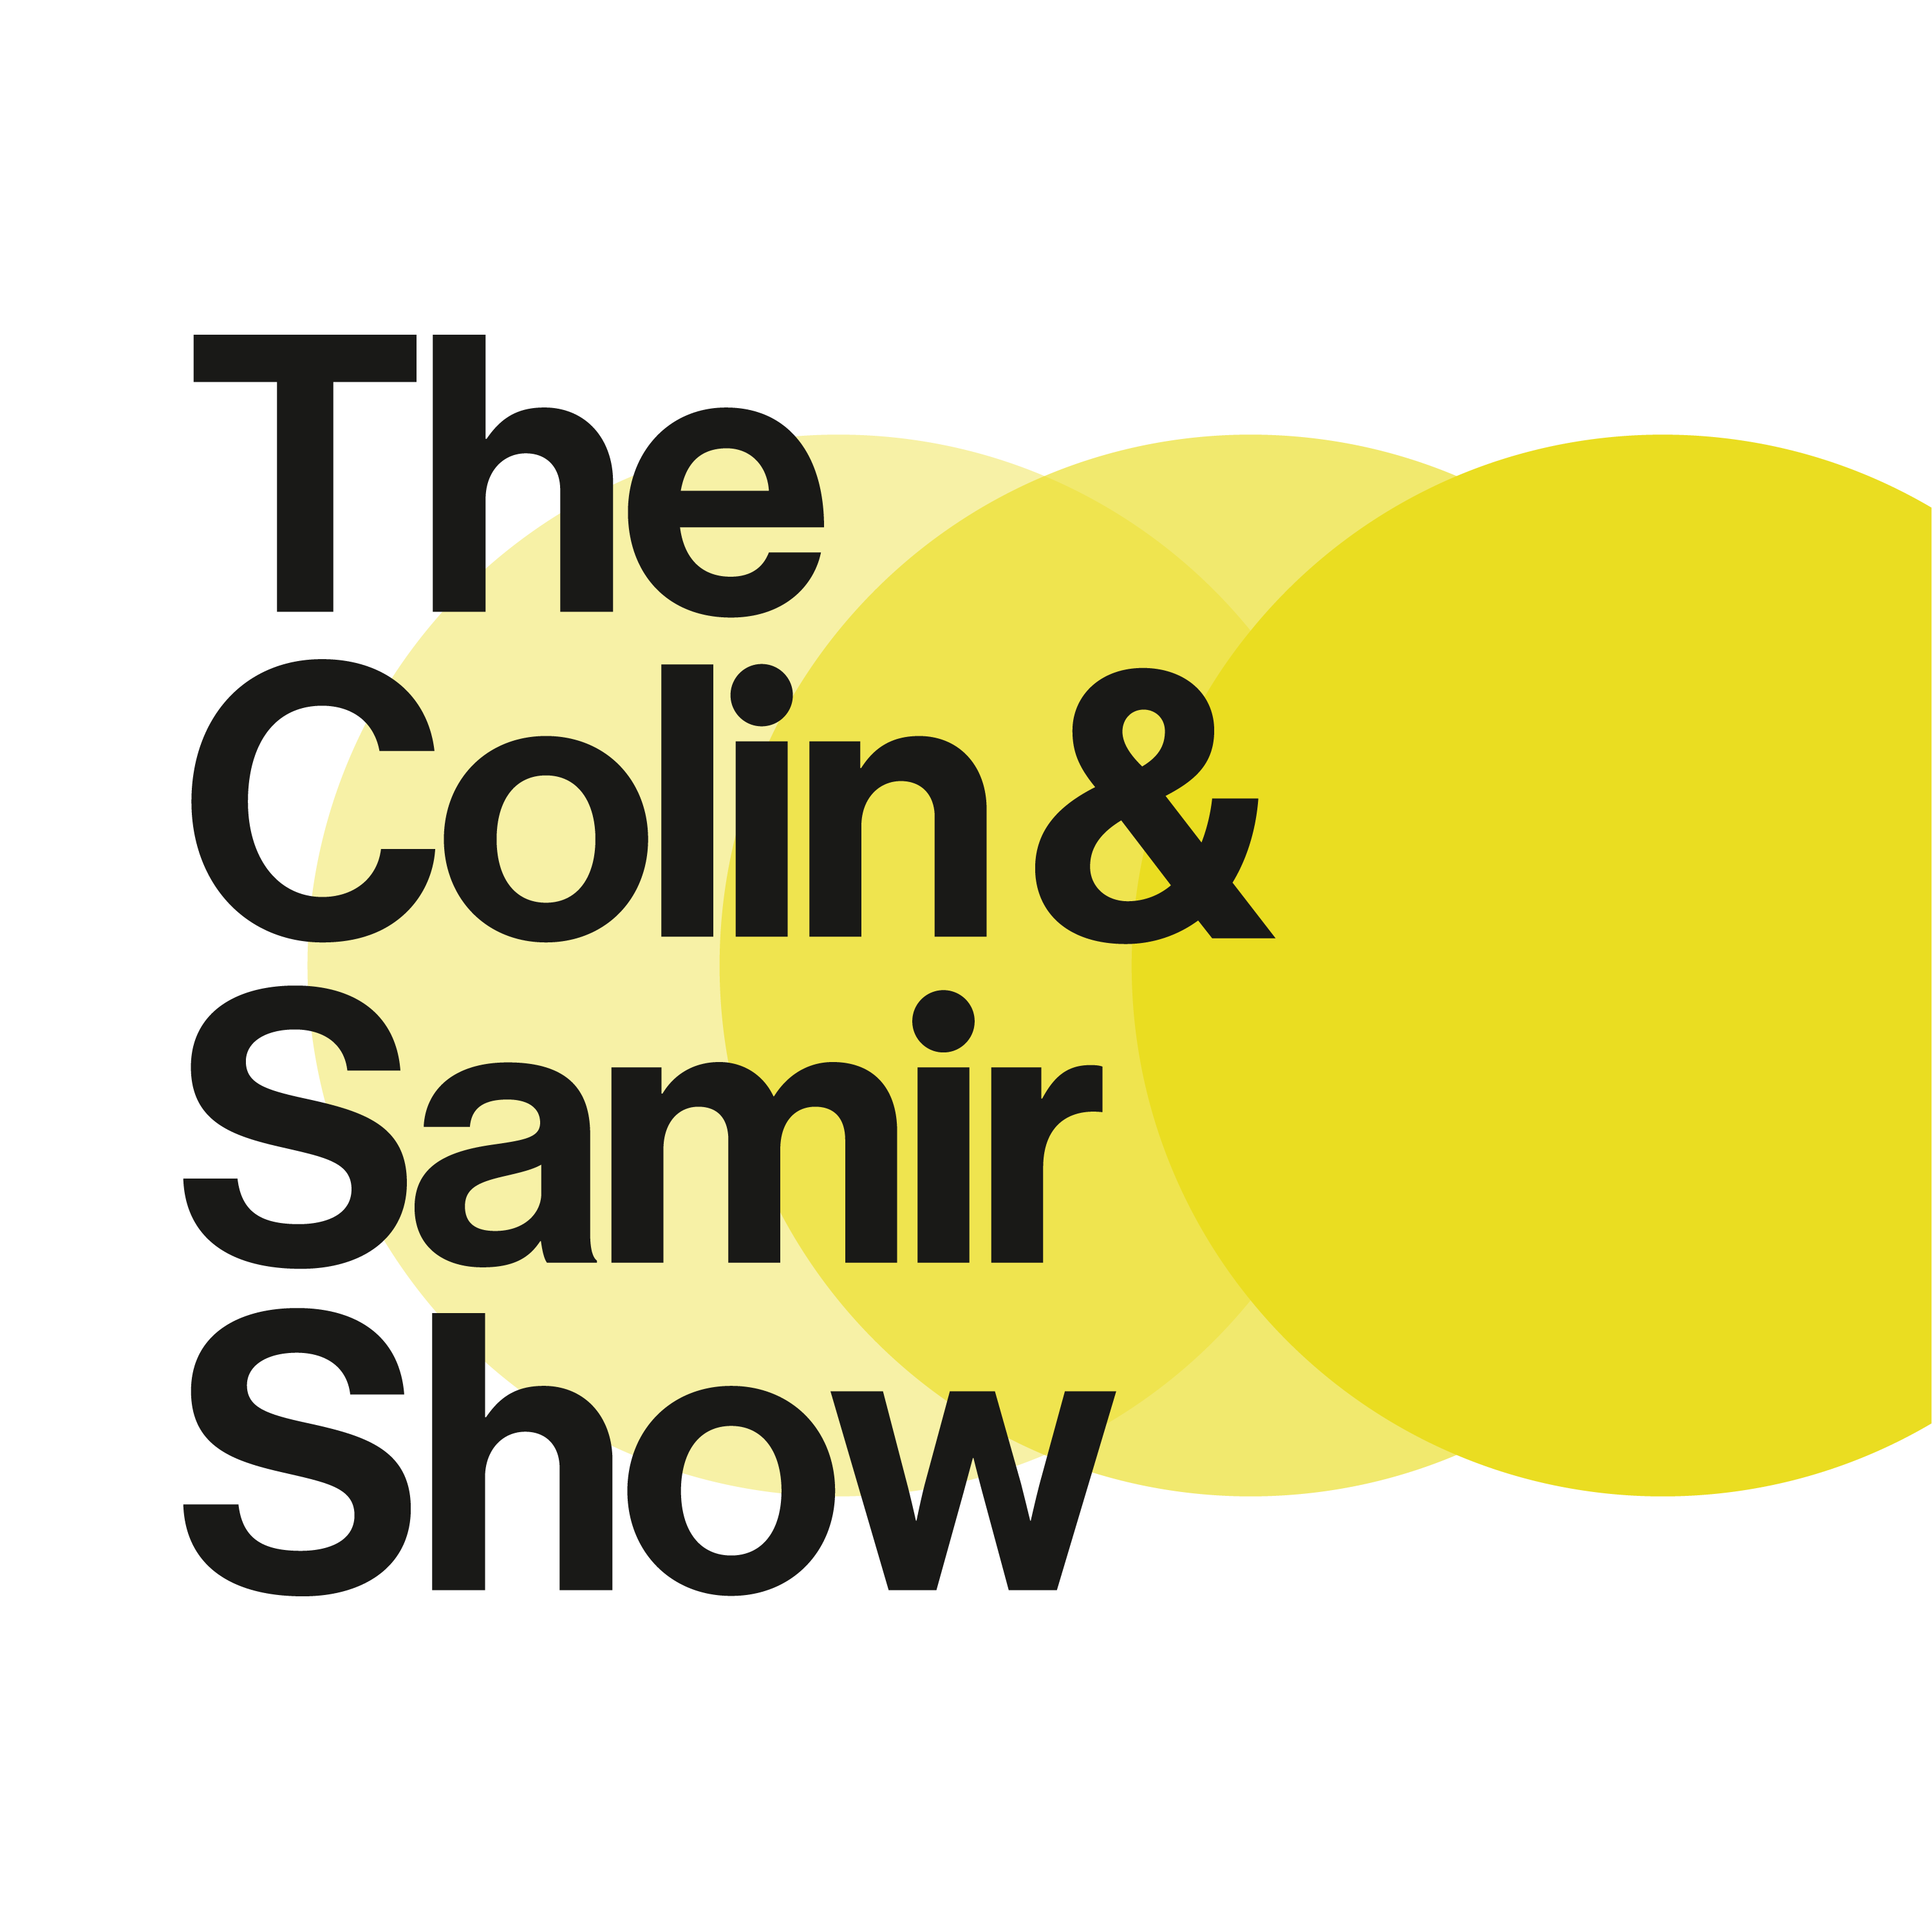 How we built The Colin and Samir Show